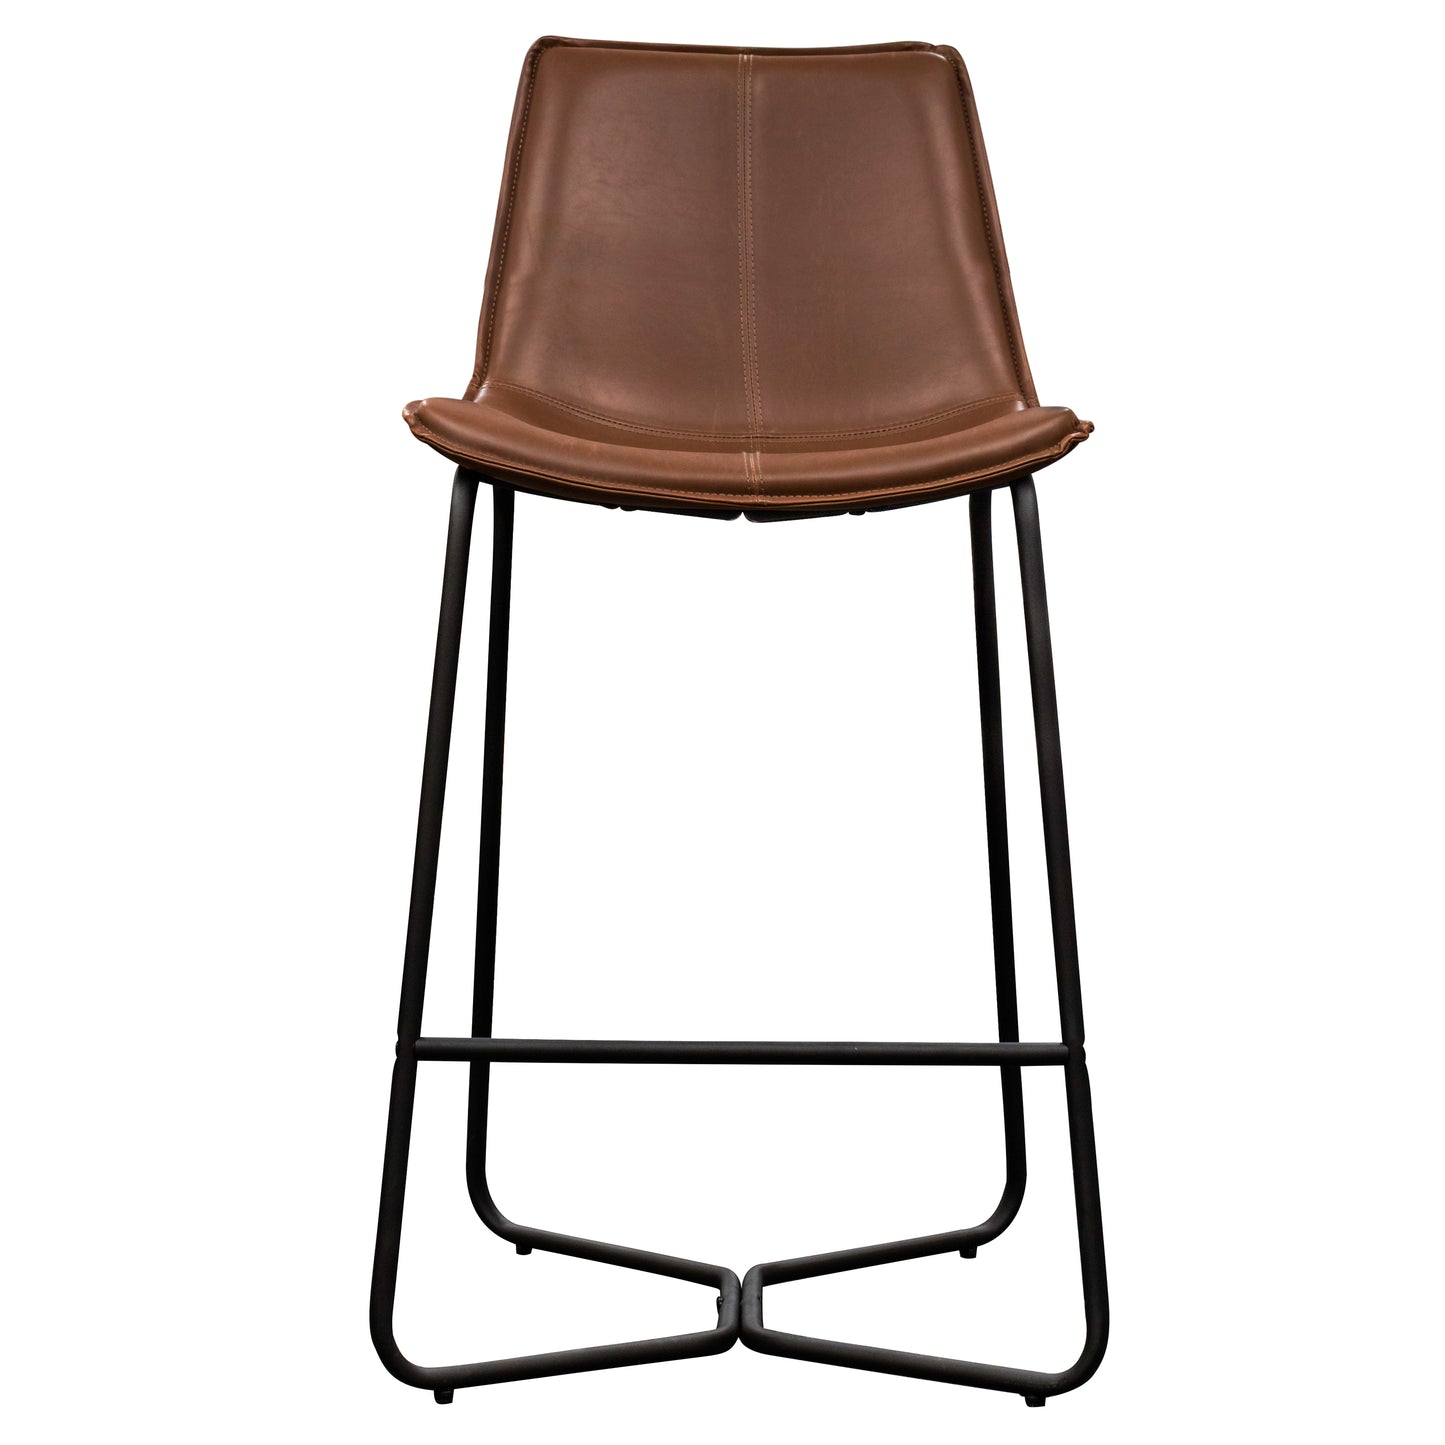 Load image into Gallery viewer, A Slapton Stool Brown (2pk) 480x550x975mm with black frame for home furniture and interior decor from Kikiathome.co.uk.
